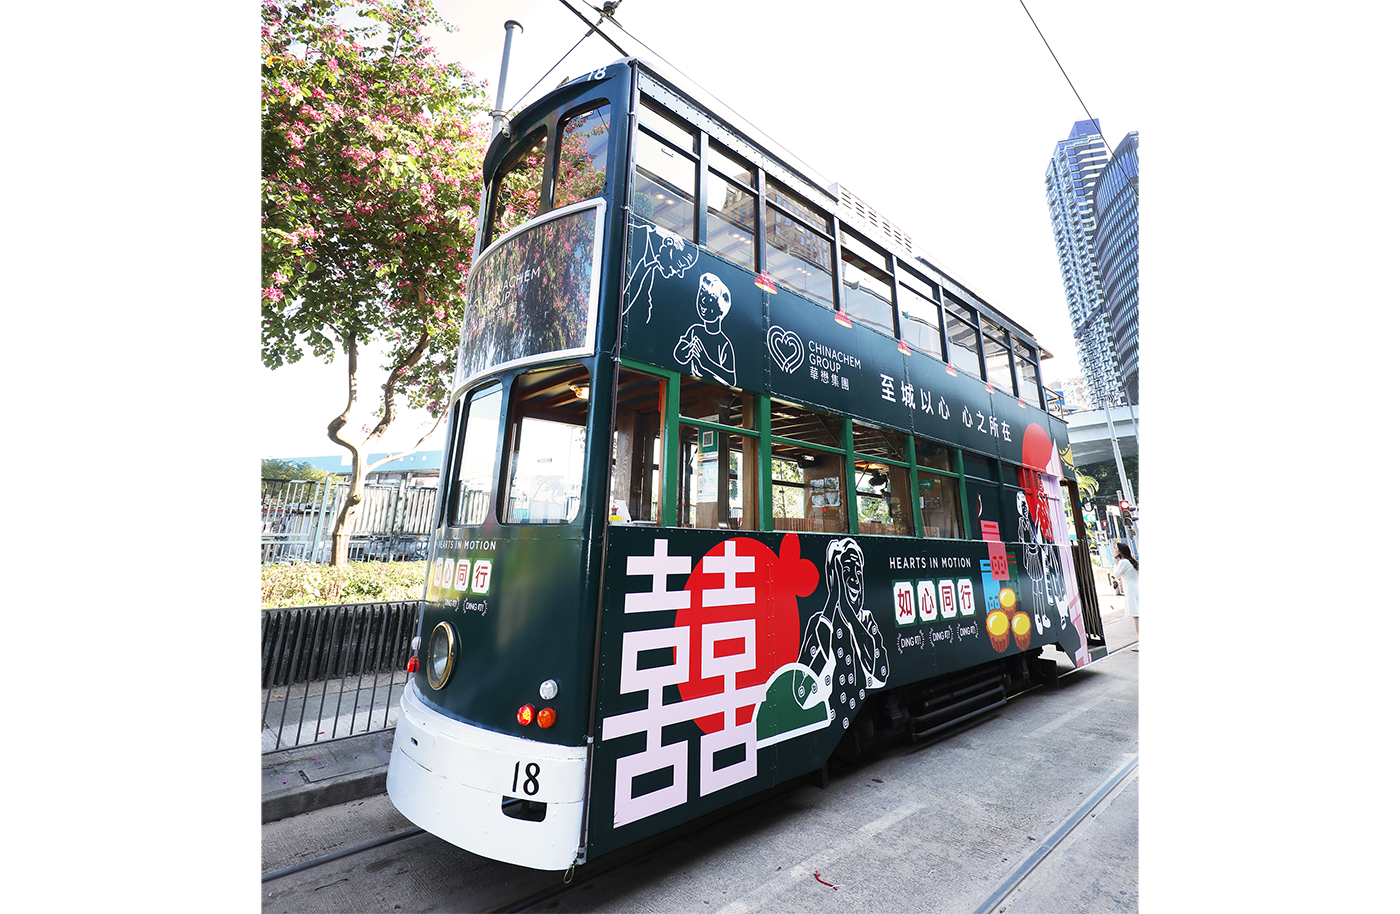 Chinachem Shuttle Tram “Hearts in Motion Ding! Ding! Ding!” 4,000 Seniors, Children and Underprivileged Families Will Join Unique Tram Rides Connect Hong Kong’s Heritage with Modern Developments